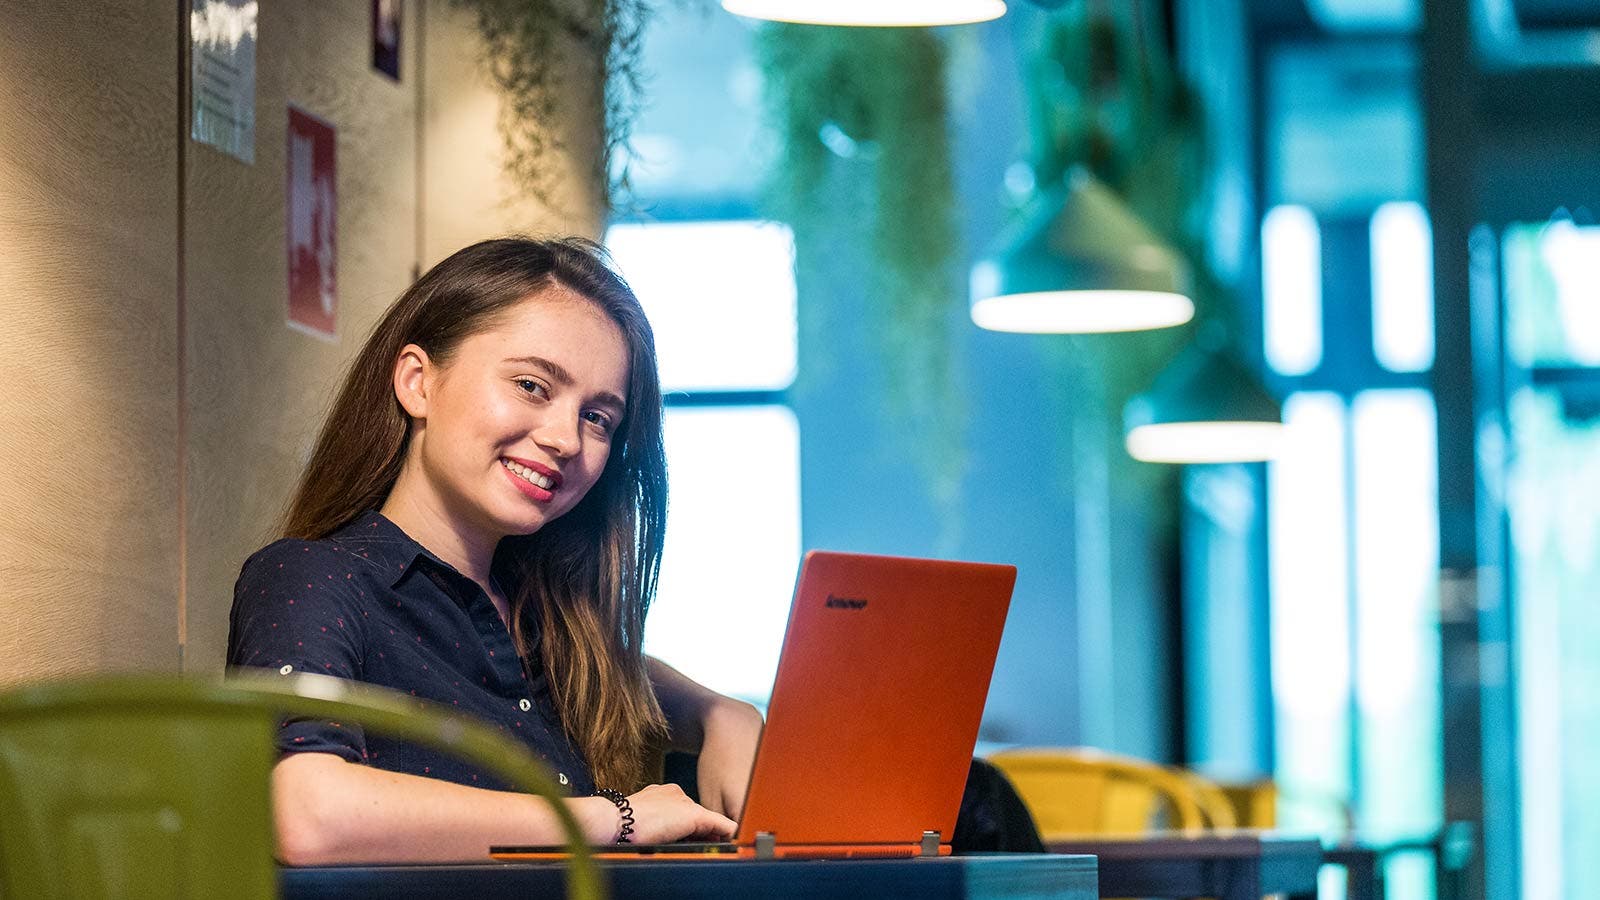 Student smiling and working on laptop